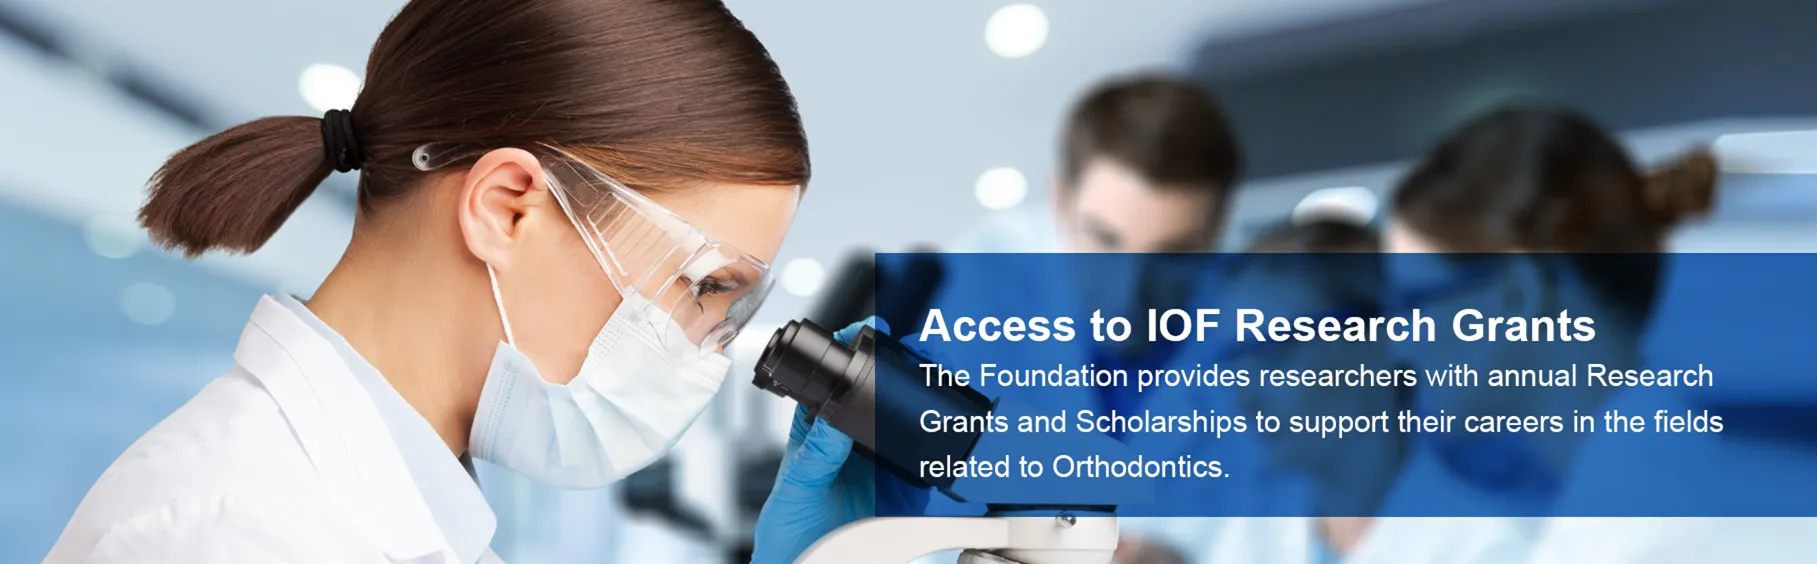 research applicant index banner